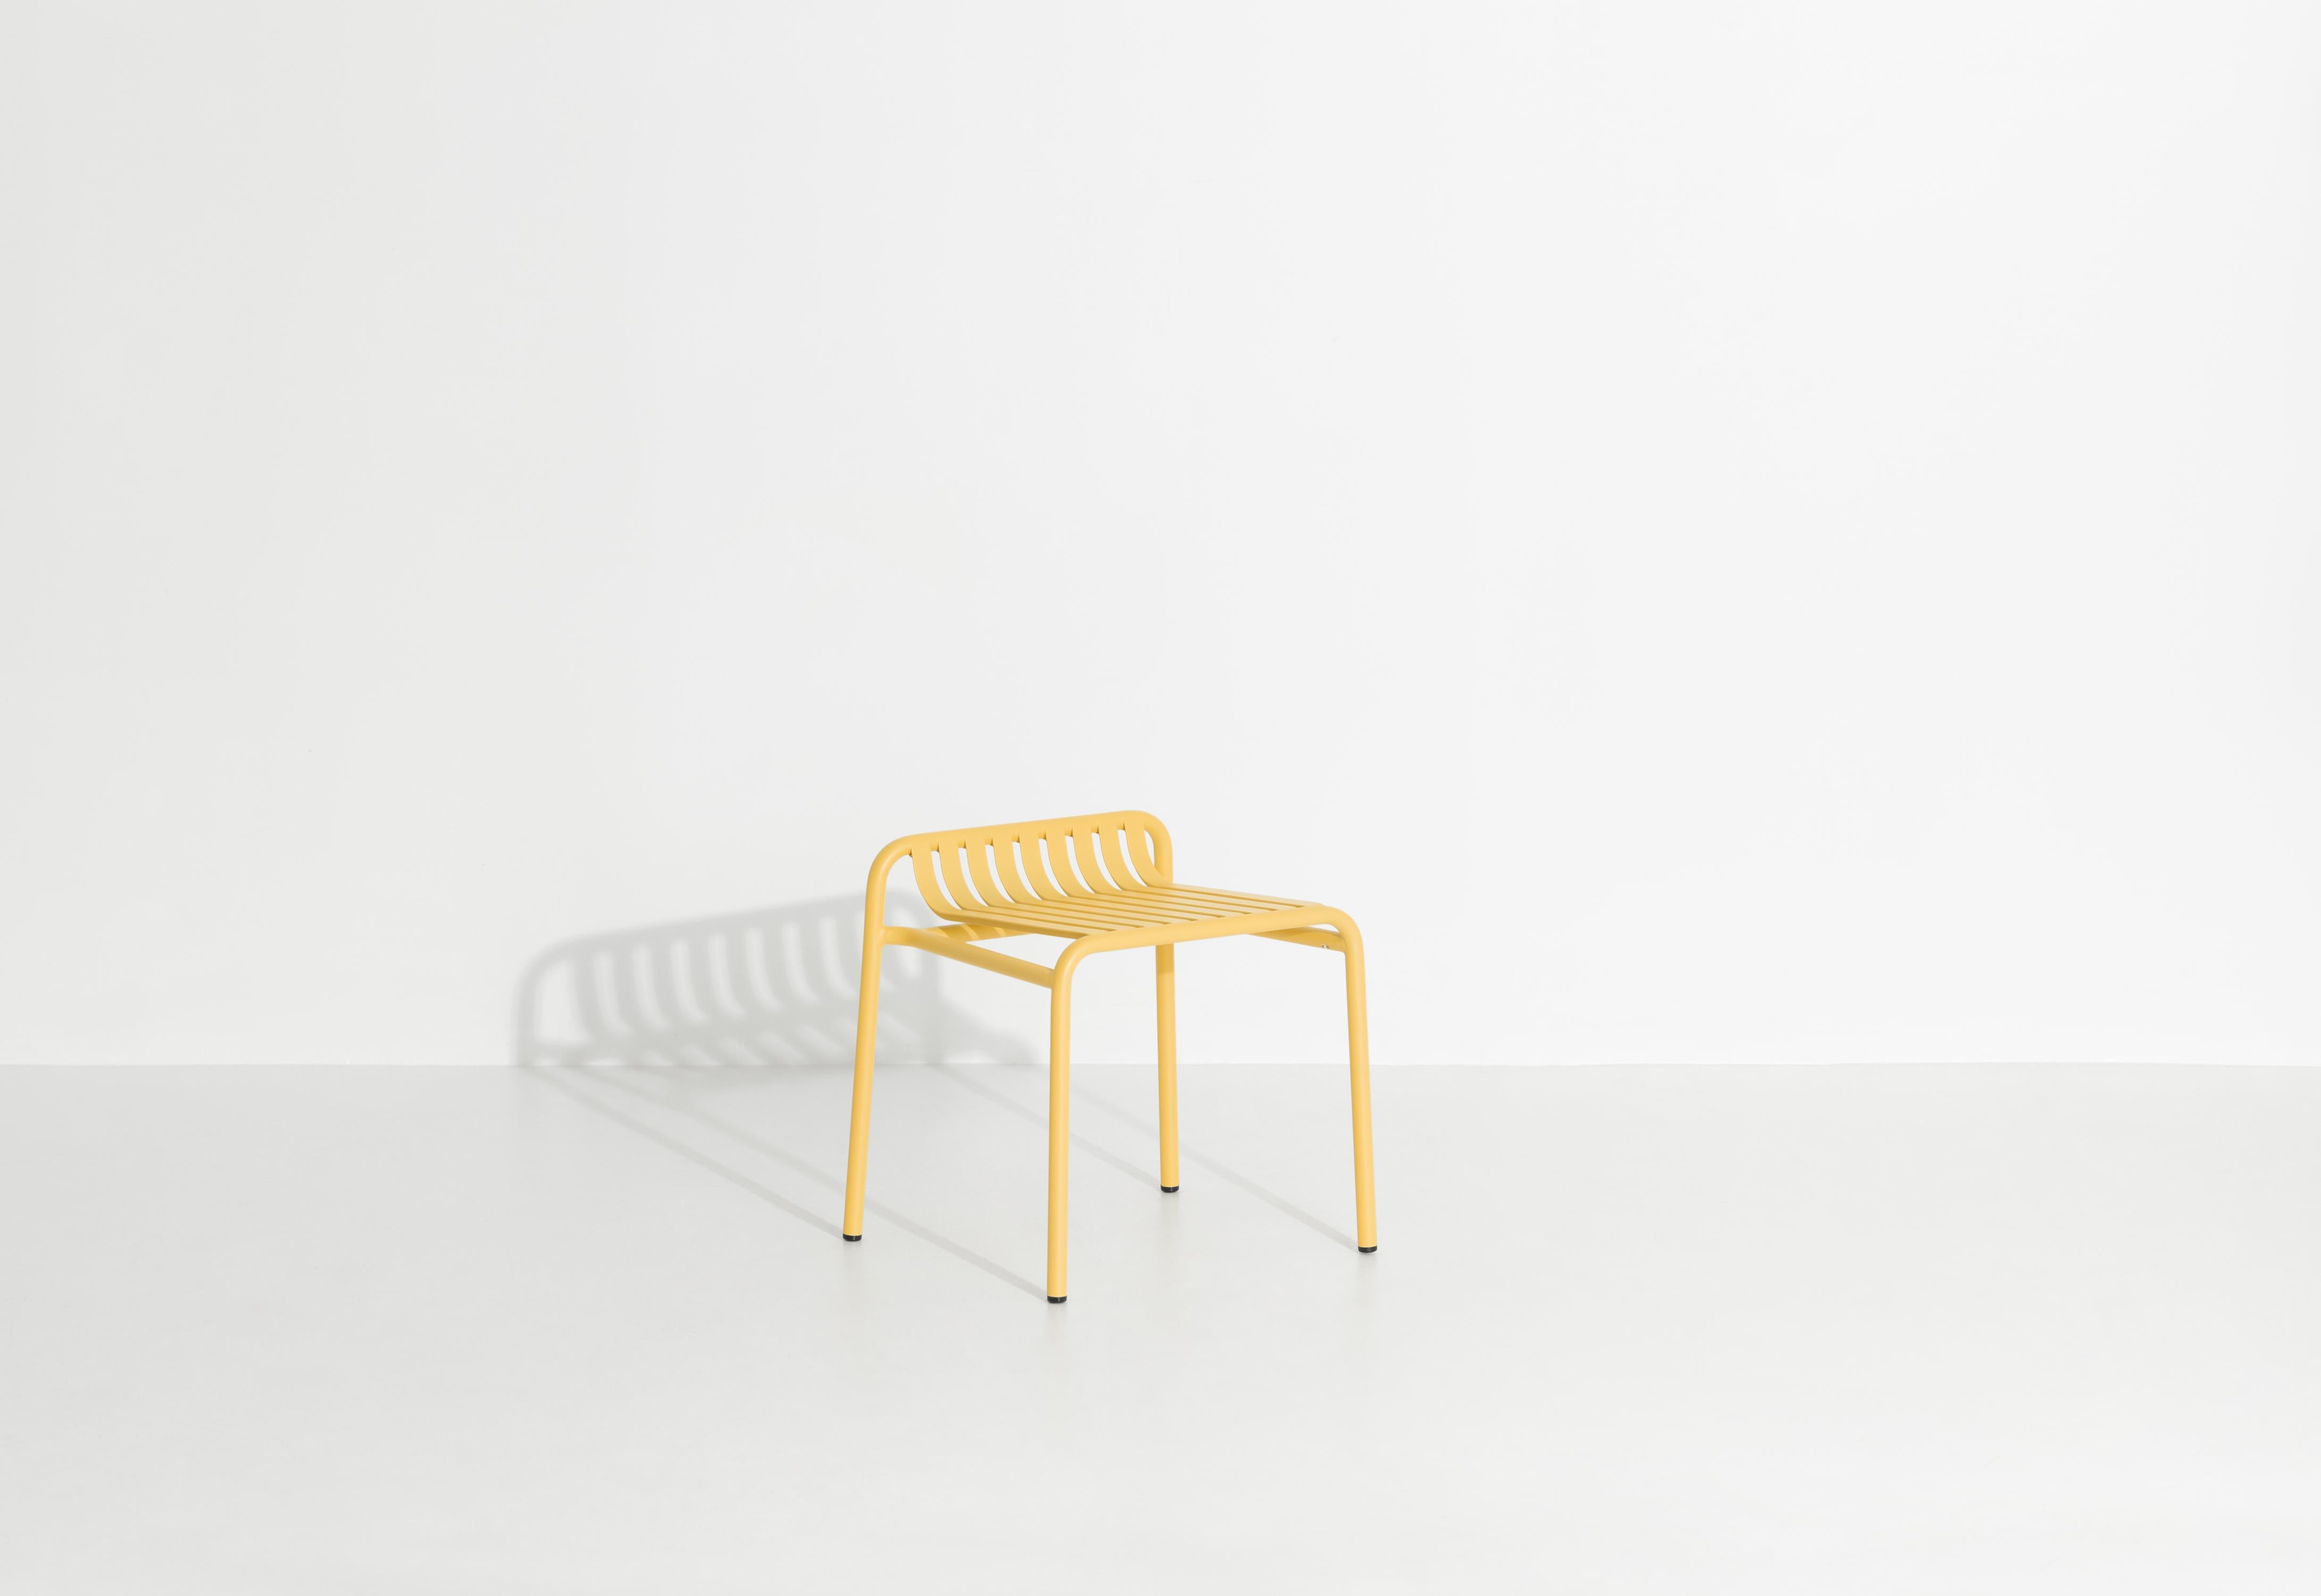 Petite Friture Week-End Stool in Saffron Aluminium by Studio BrichetZiegler, 2017

The week-end collection is a full range of outdoor furniture, in aluminium grained epoxy paint, matt finish, that includes 18 functions and 8 colours for the retail